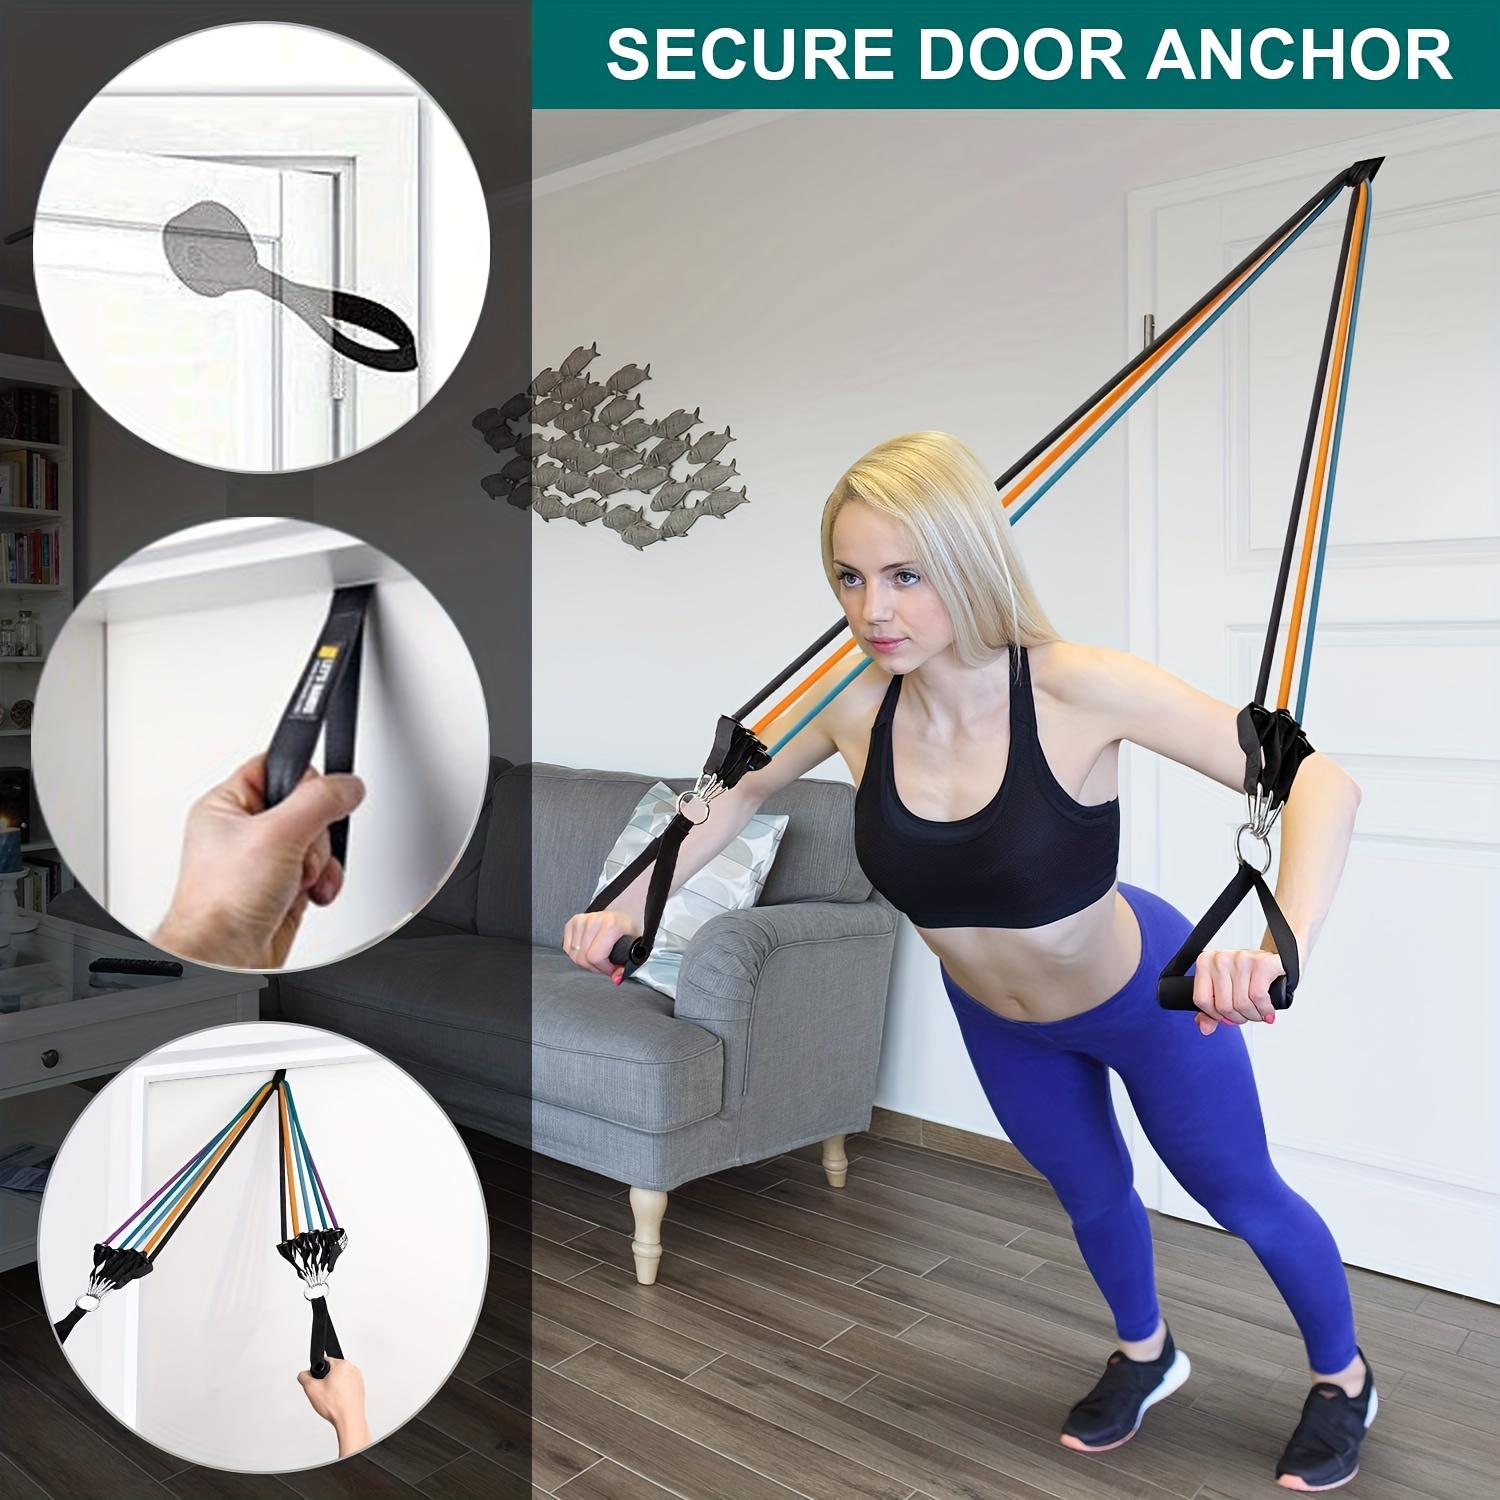 Door Anchor - Ideal For Home Workouts with Resistance Bands